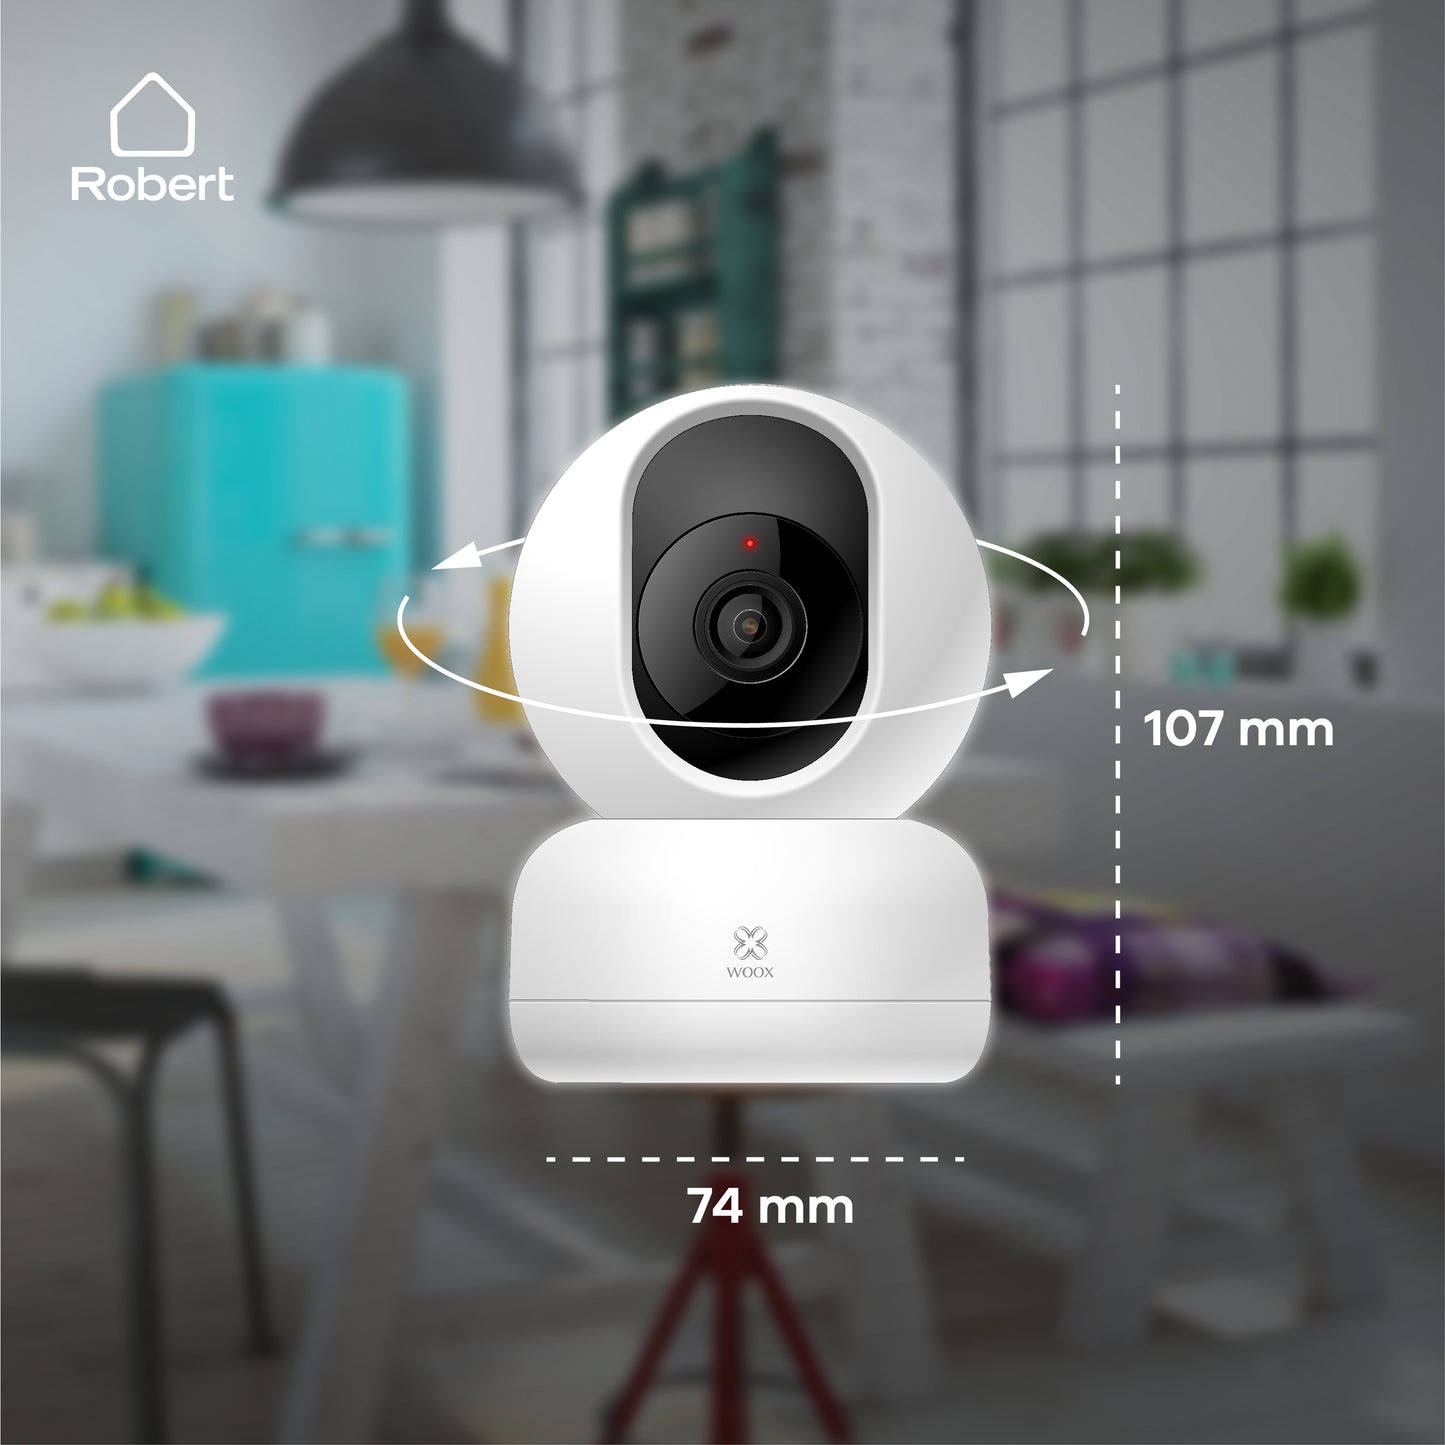 Online PTZ camera for indoors, 2MP/360˚ (white)